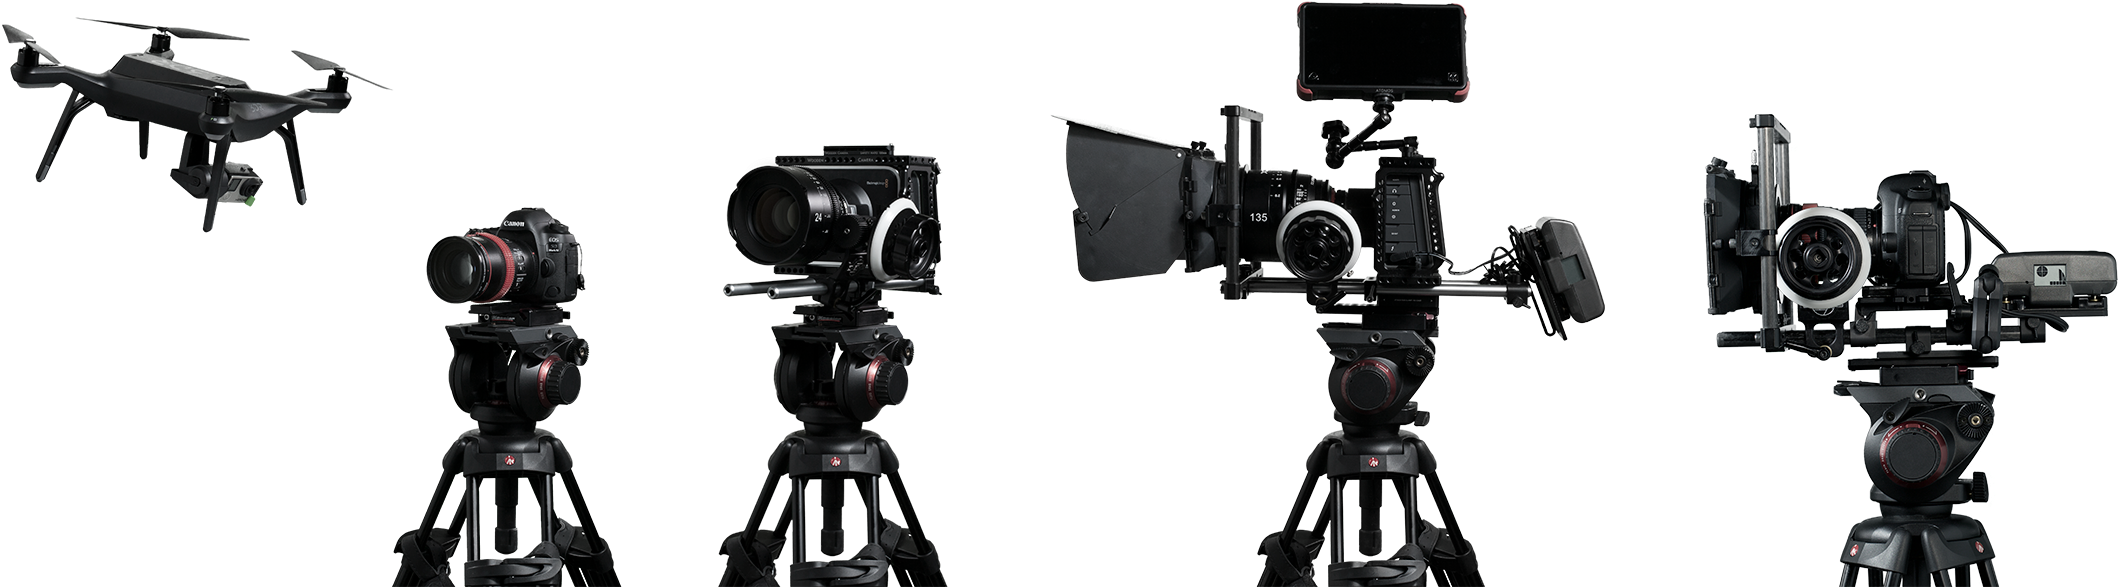 A Couple Of Cameras On Tripods